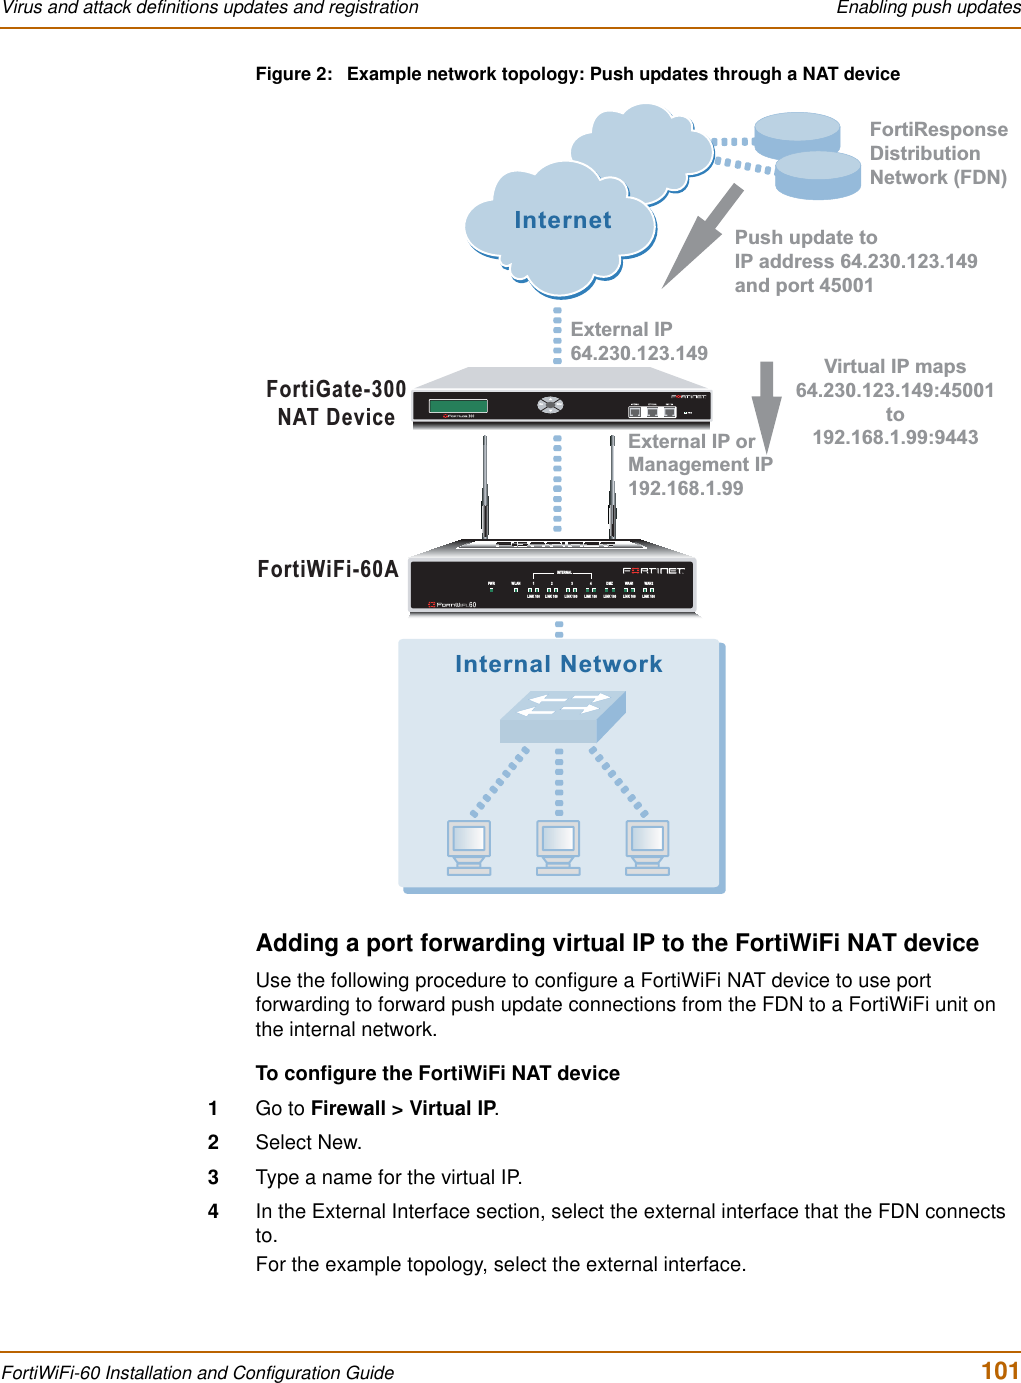 Virus and attack definitions updates and registration  Enabling push updatesFortiWiFi-60 Installation and Configuration Guide  101Figure 2: Example network topology: Push updates through a NAT deviceAdding a port forwarding virtual IP to the FortiWiFi NAT deviceUse the following procedure to configure a FortiWiFi NAT device to use port forwarding to forward push update connections from the FDN to a FortiWiFi unit on the internal network.To configure the FortiWiFi NAT device1Go to Firewall &gt; Virtual IP.2Select New.3Type a name for the virtual IP.4In the External Interface section, select the external interface that the FDN connects to.For the example topology, select the external interface.InternetVirtual IP maps64.230.123.149:45001to192.168.1.99:9443External IP64.230.123.149FortiResponseDistributionNetwork (FDN)FortiWiFi-60AInternal NetworkEsc EnterExternal IP or Management IP192.168.1.99FortiGate-300NAT DevicePush update to IP address 64.230.123.149and port 45001INTERNALDMZ4321LINK 100 LINK 100 LINK 100 LINK 100 LINK 100 LINK 100 LINK 100WAN1 WA N2PWR WLAN